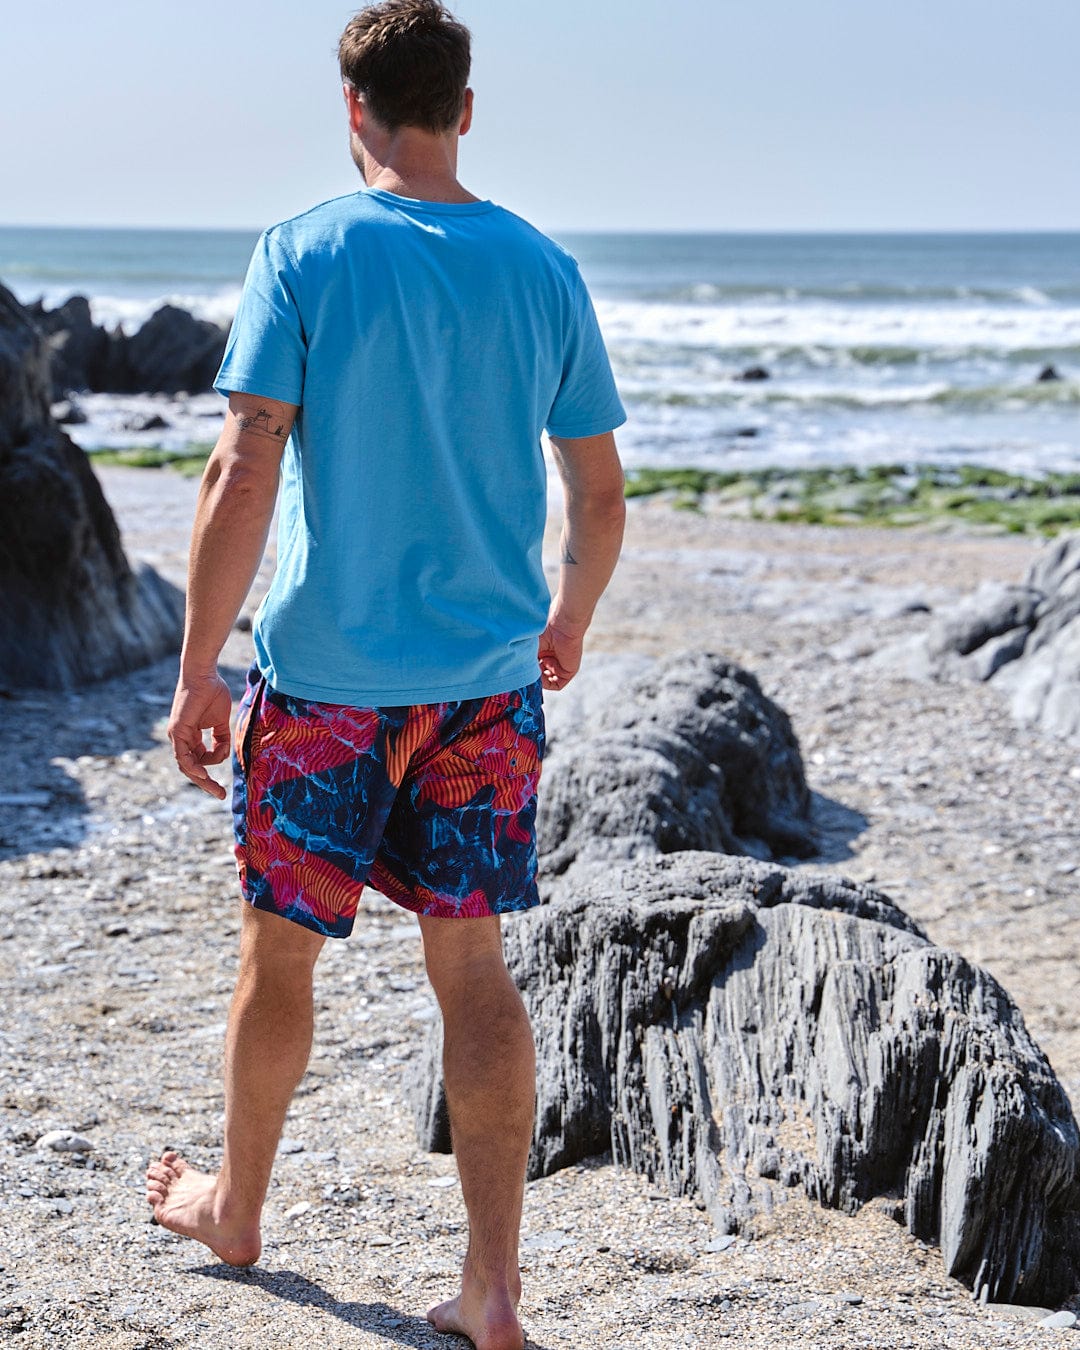 The man is wearing a Saltrock - Poolside Mens All Over Print Swimshort in Teal.